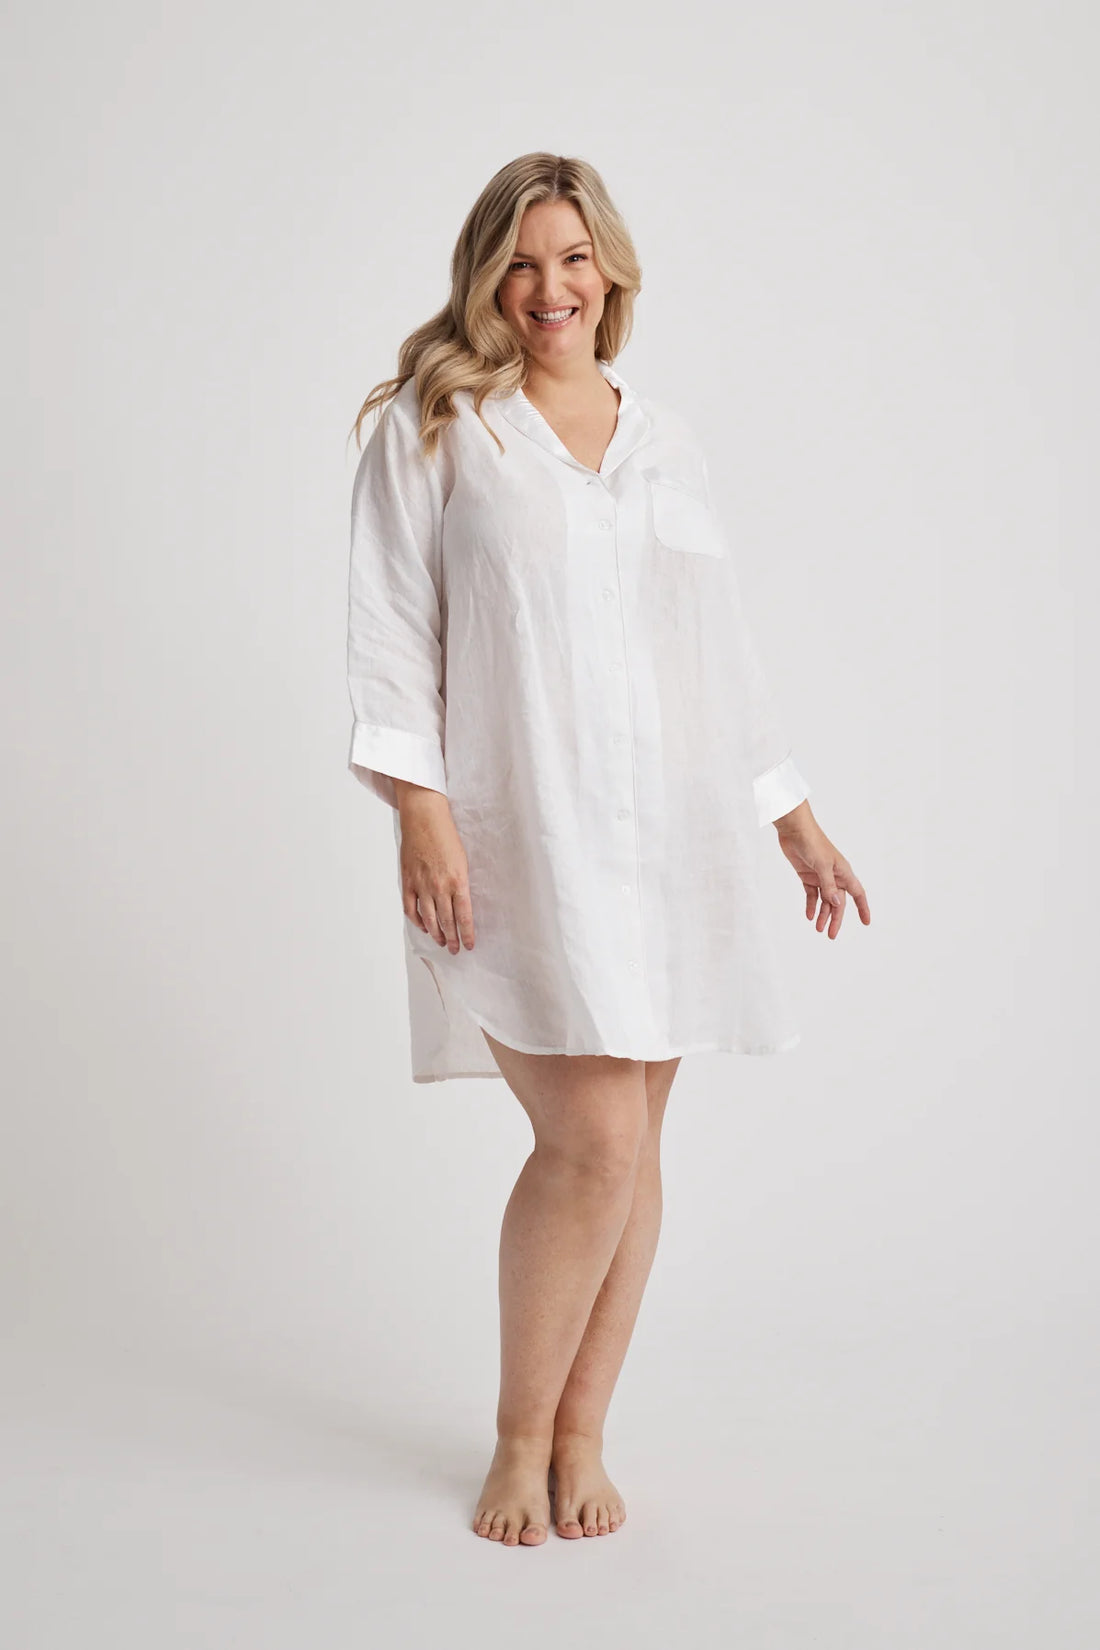 The Price of Luxury: Understanding the Value and Worth of Luxury Linen Nightwear